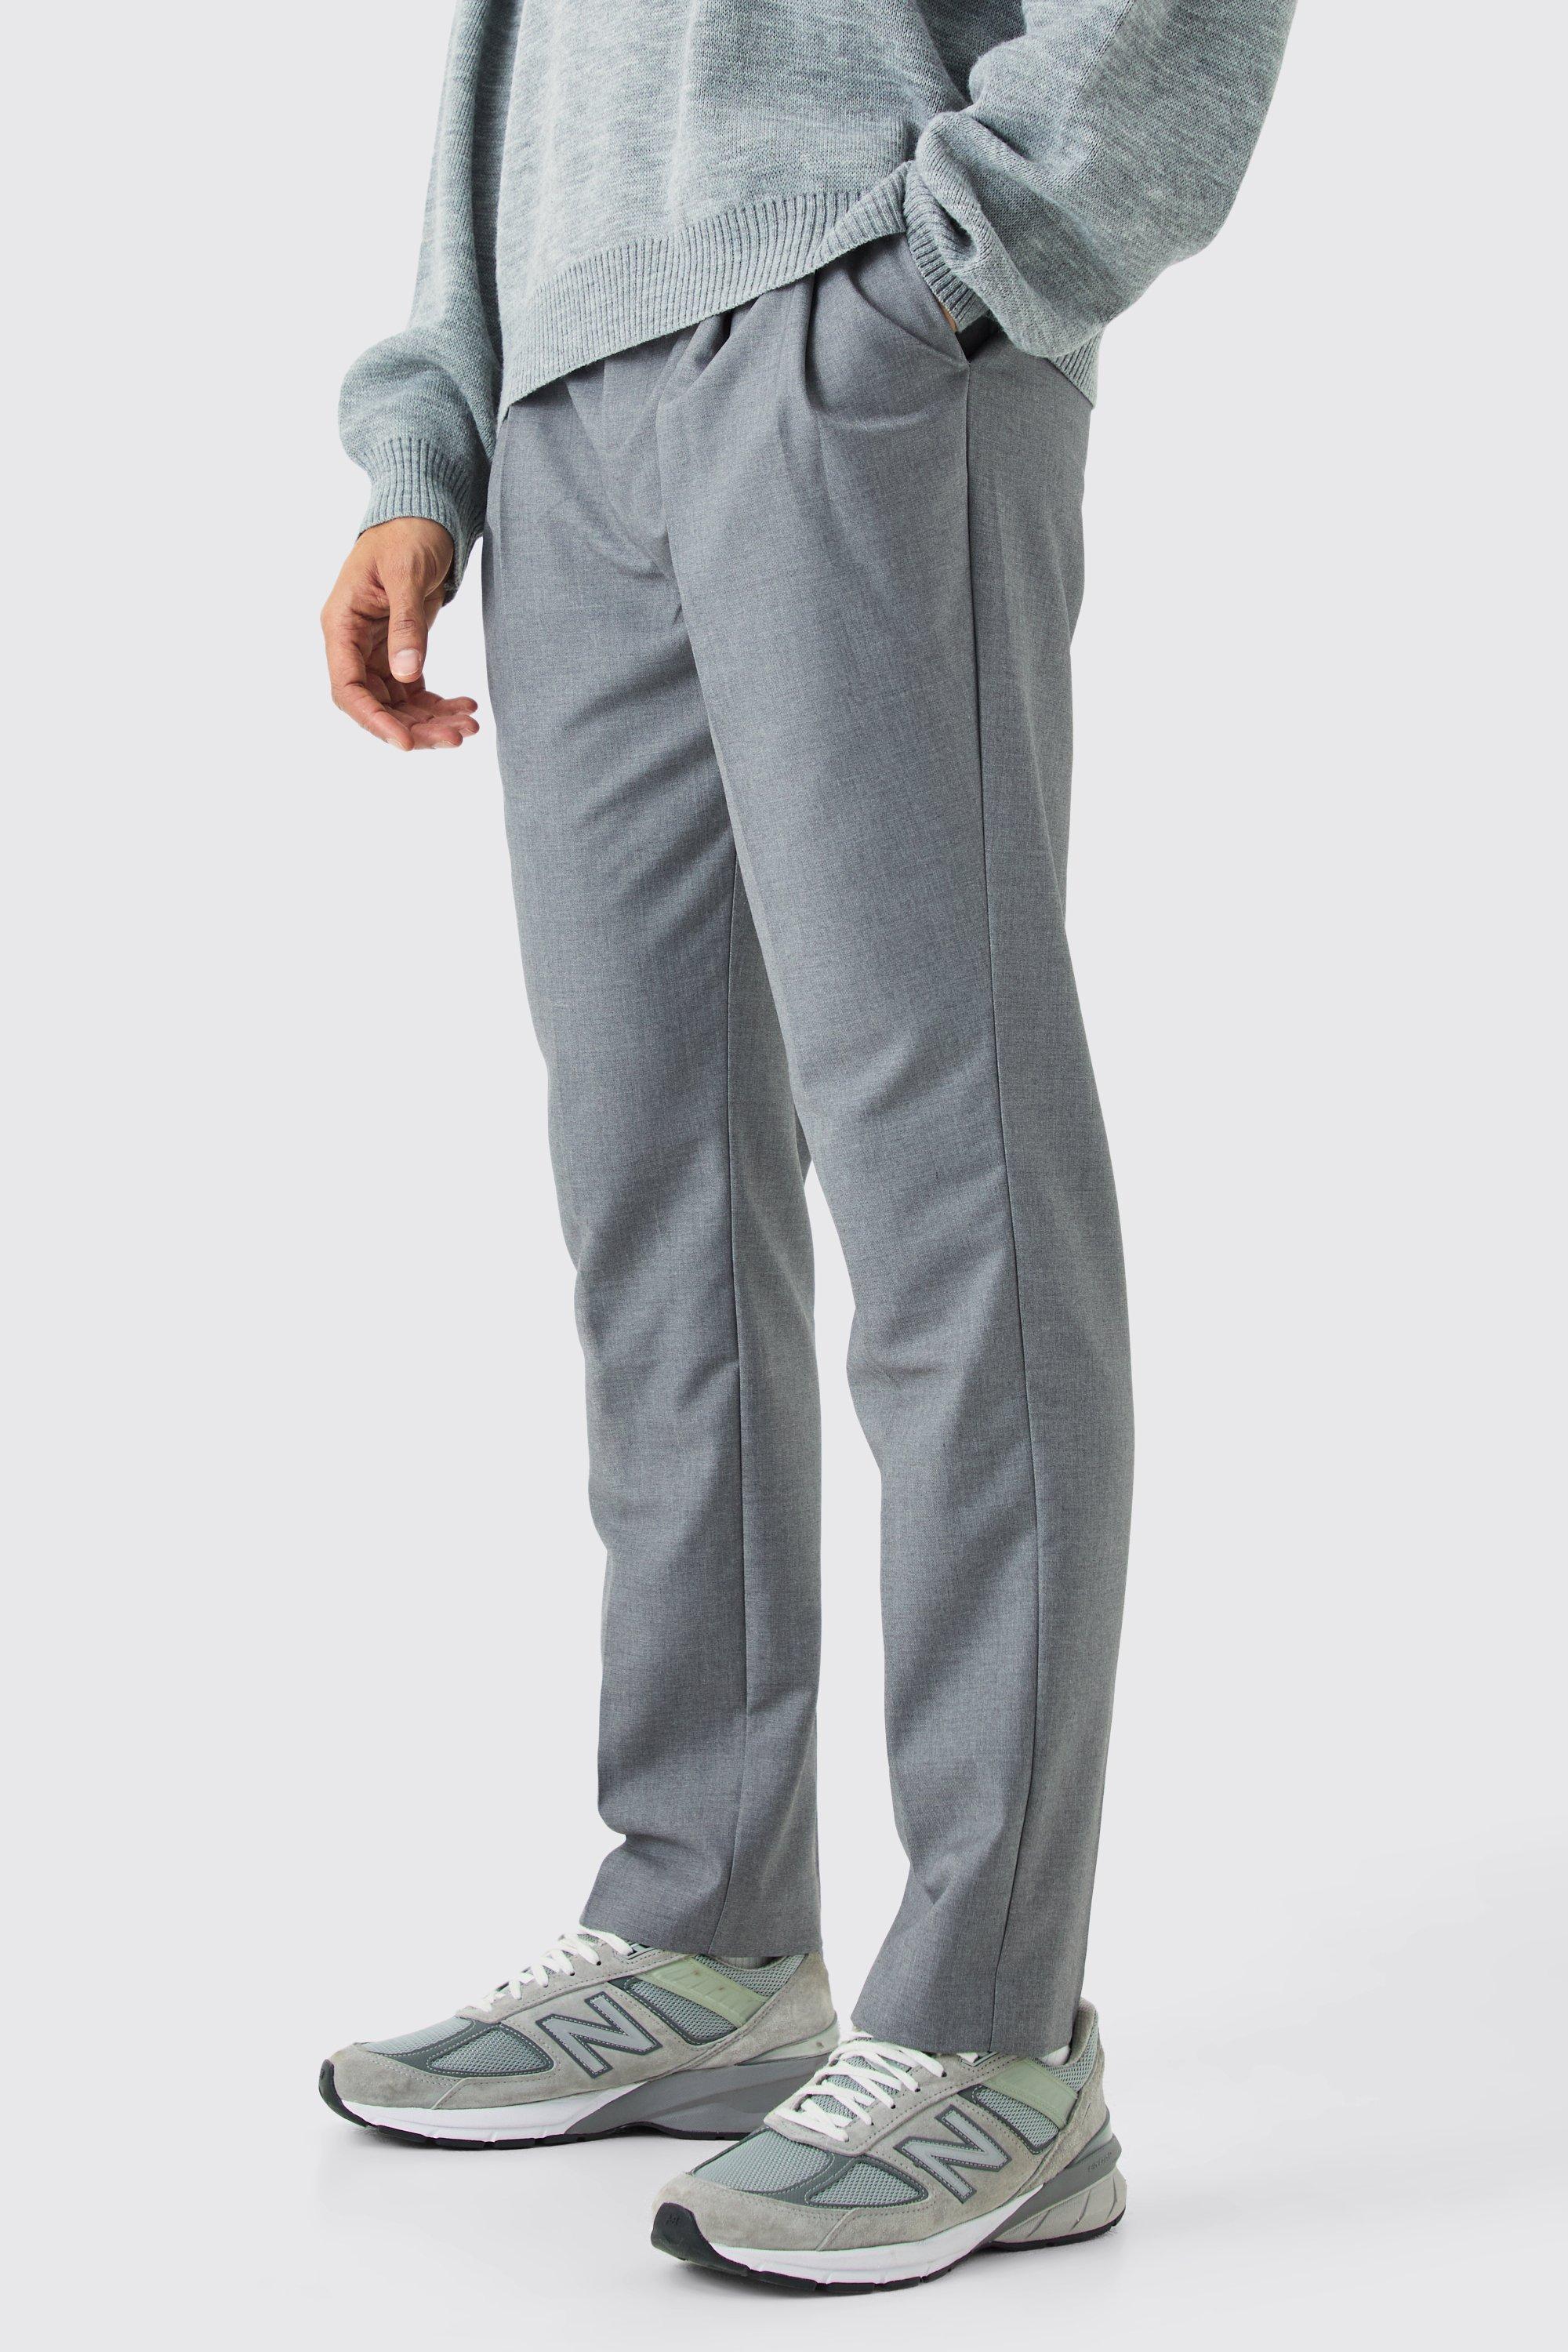 Mens Grey Pleat Front Tailored Straight Leg Trousers, Grey